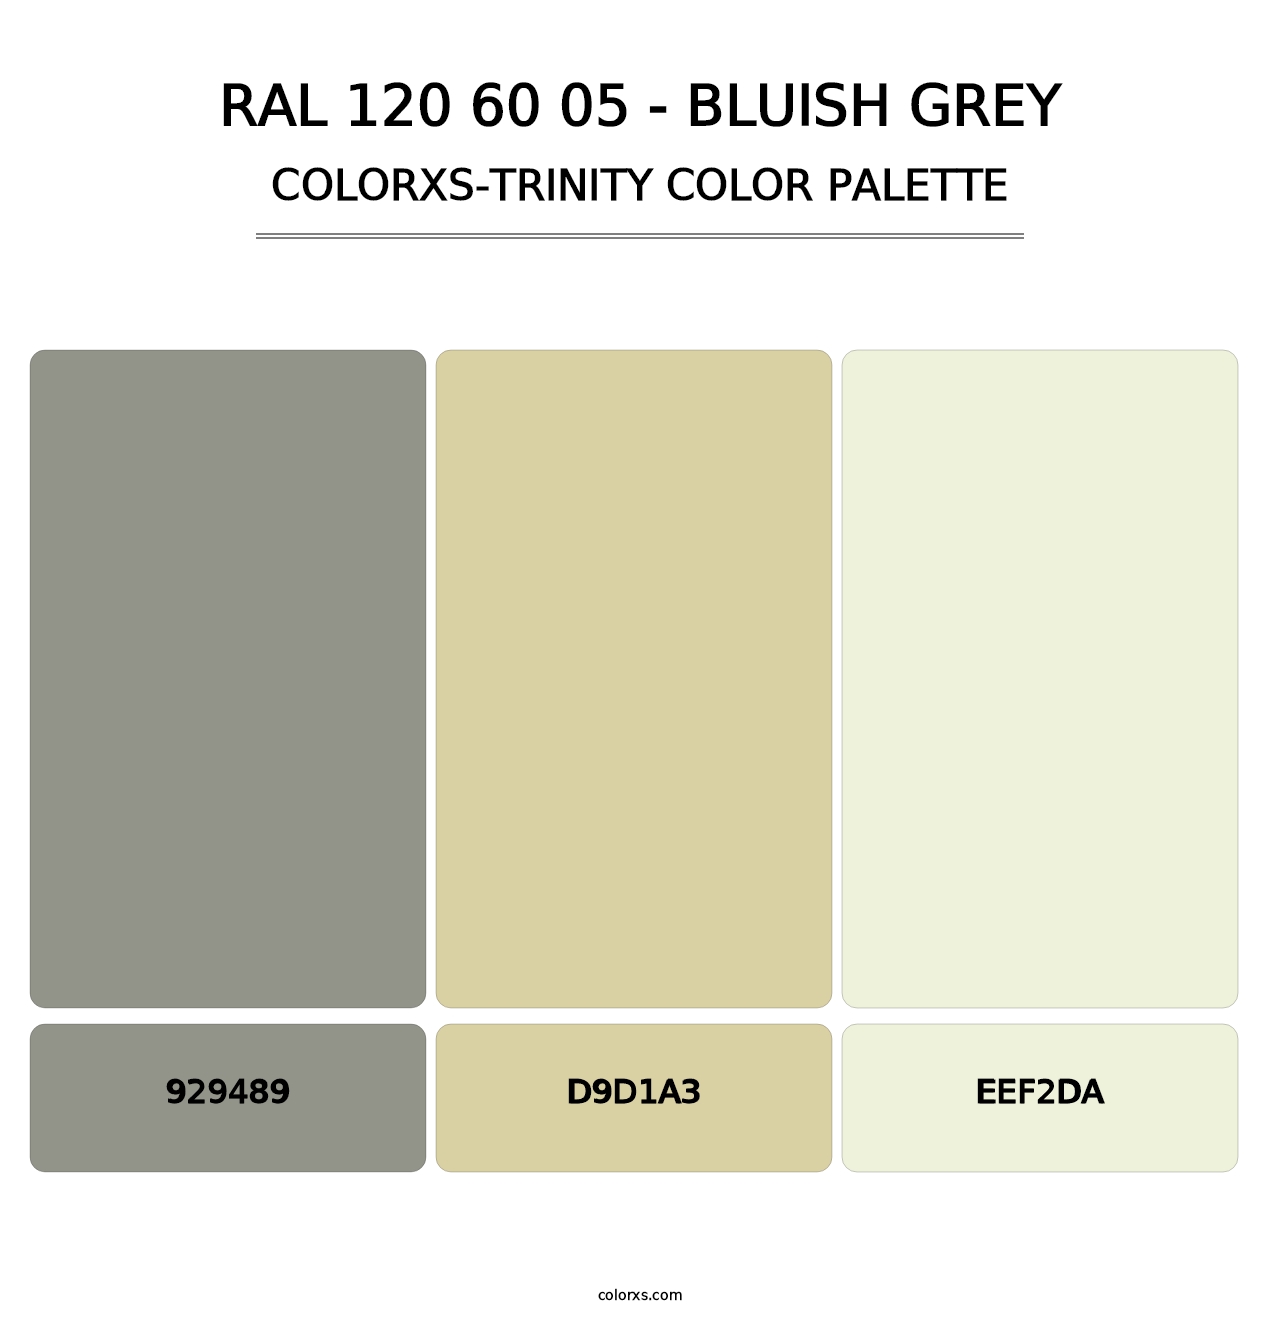 RAL 120 60 05 - Bluish Grey - Colorxs Trinity Palette